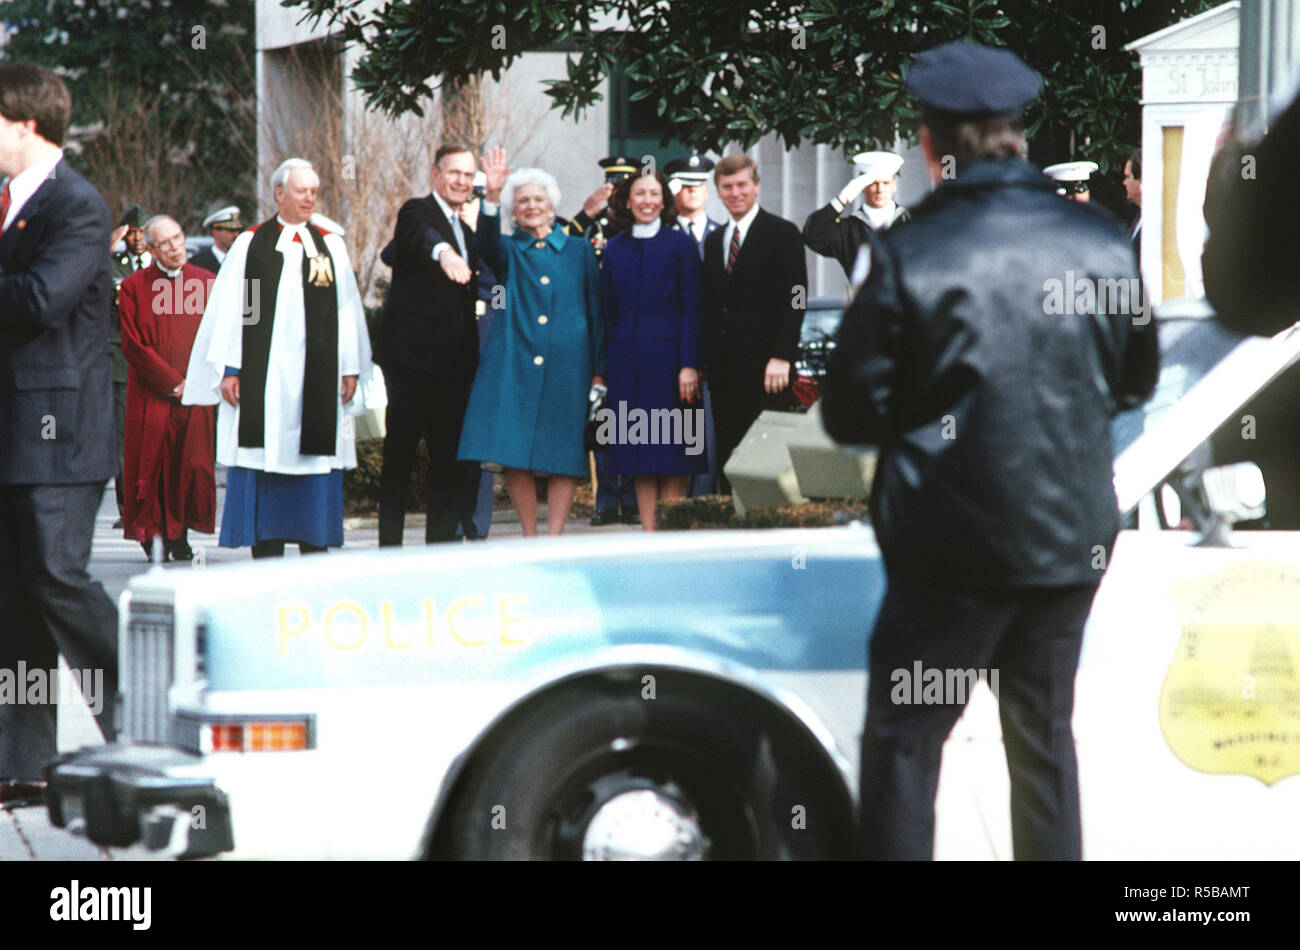 Members of the clergy stand beside President-elect George H.W. Bush, Barbara Bush, Marilyn Quayle and Vice President-elect J. Danforth Quayle following a Mass at St. John's Episcopal Church. Stock Photo